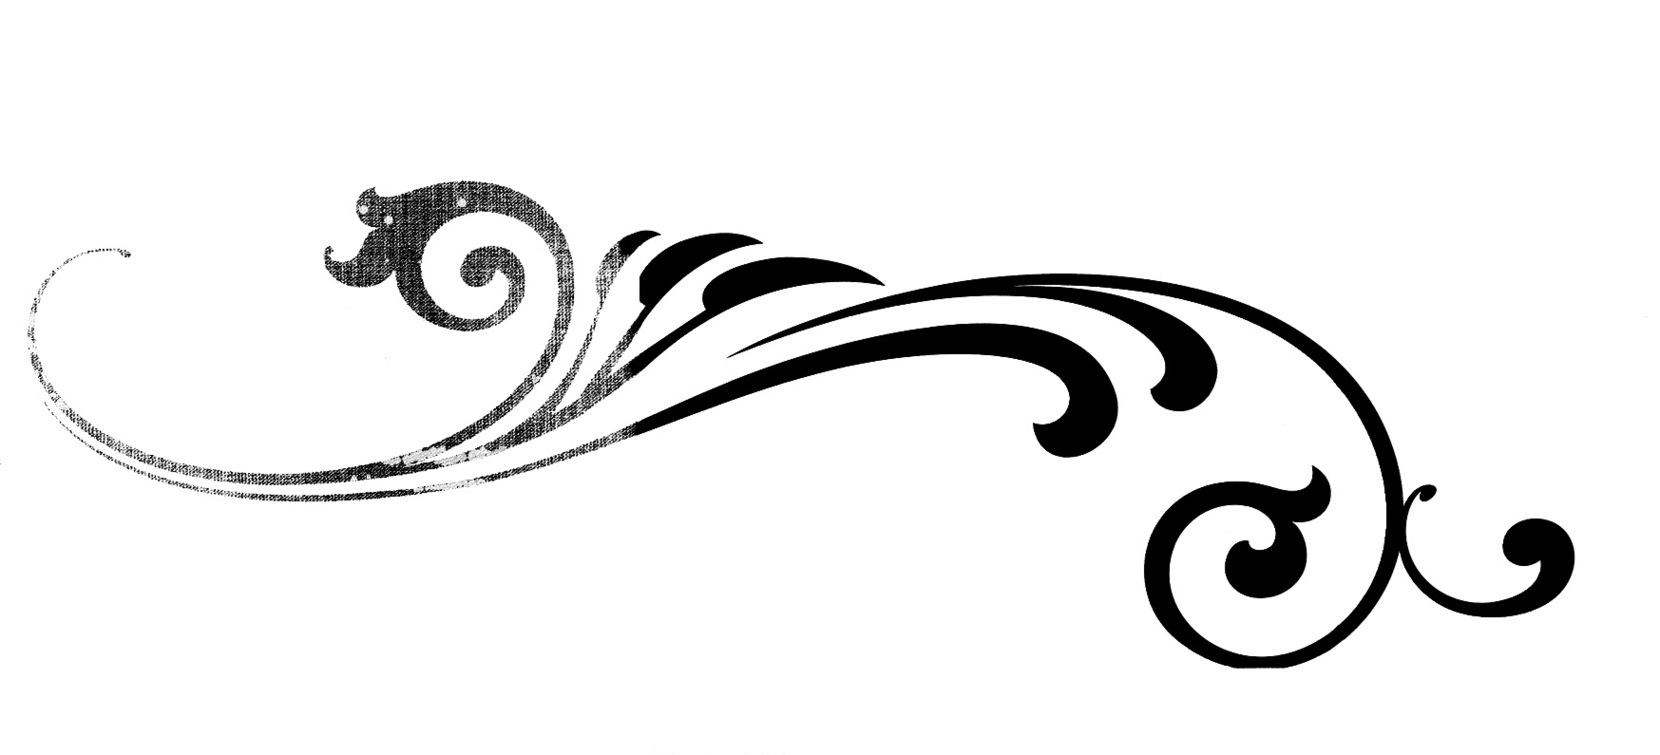 Simple Flourish Vector Art Clipart - Free to use Clip Art Resource